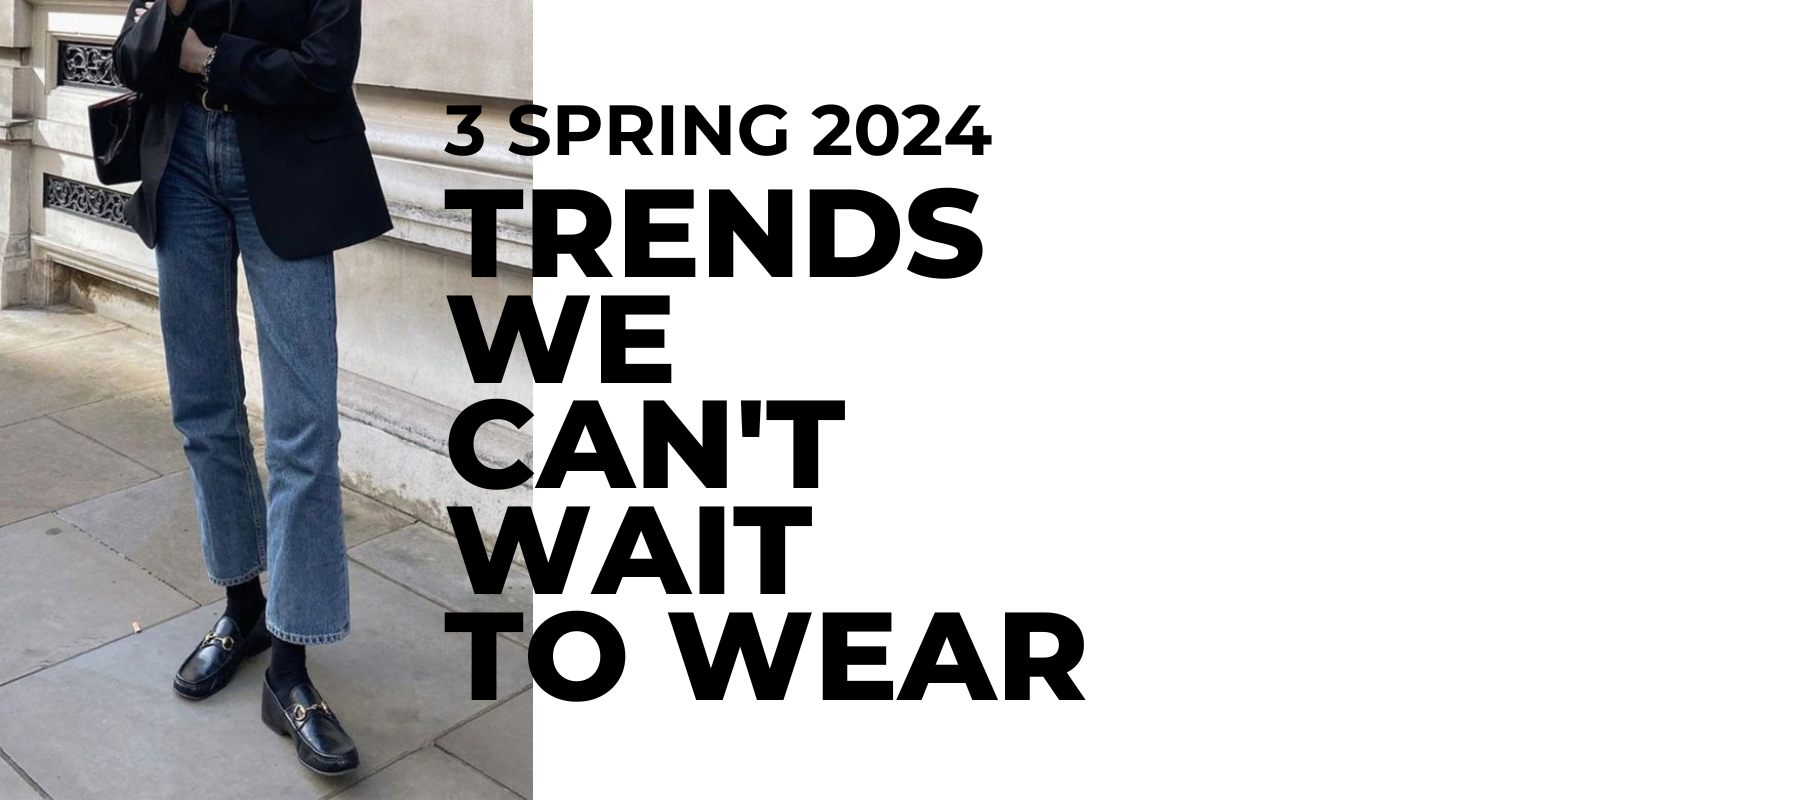 3 Spring 2024 Trends We Can't Wait To Wear.